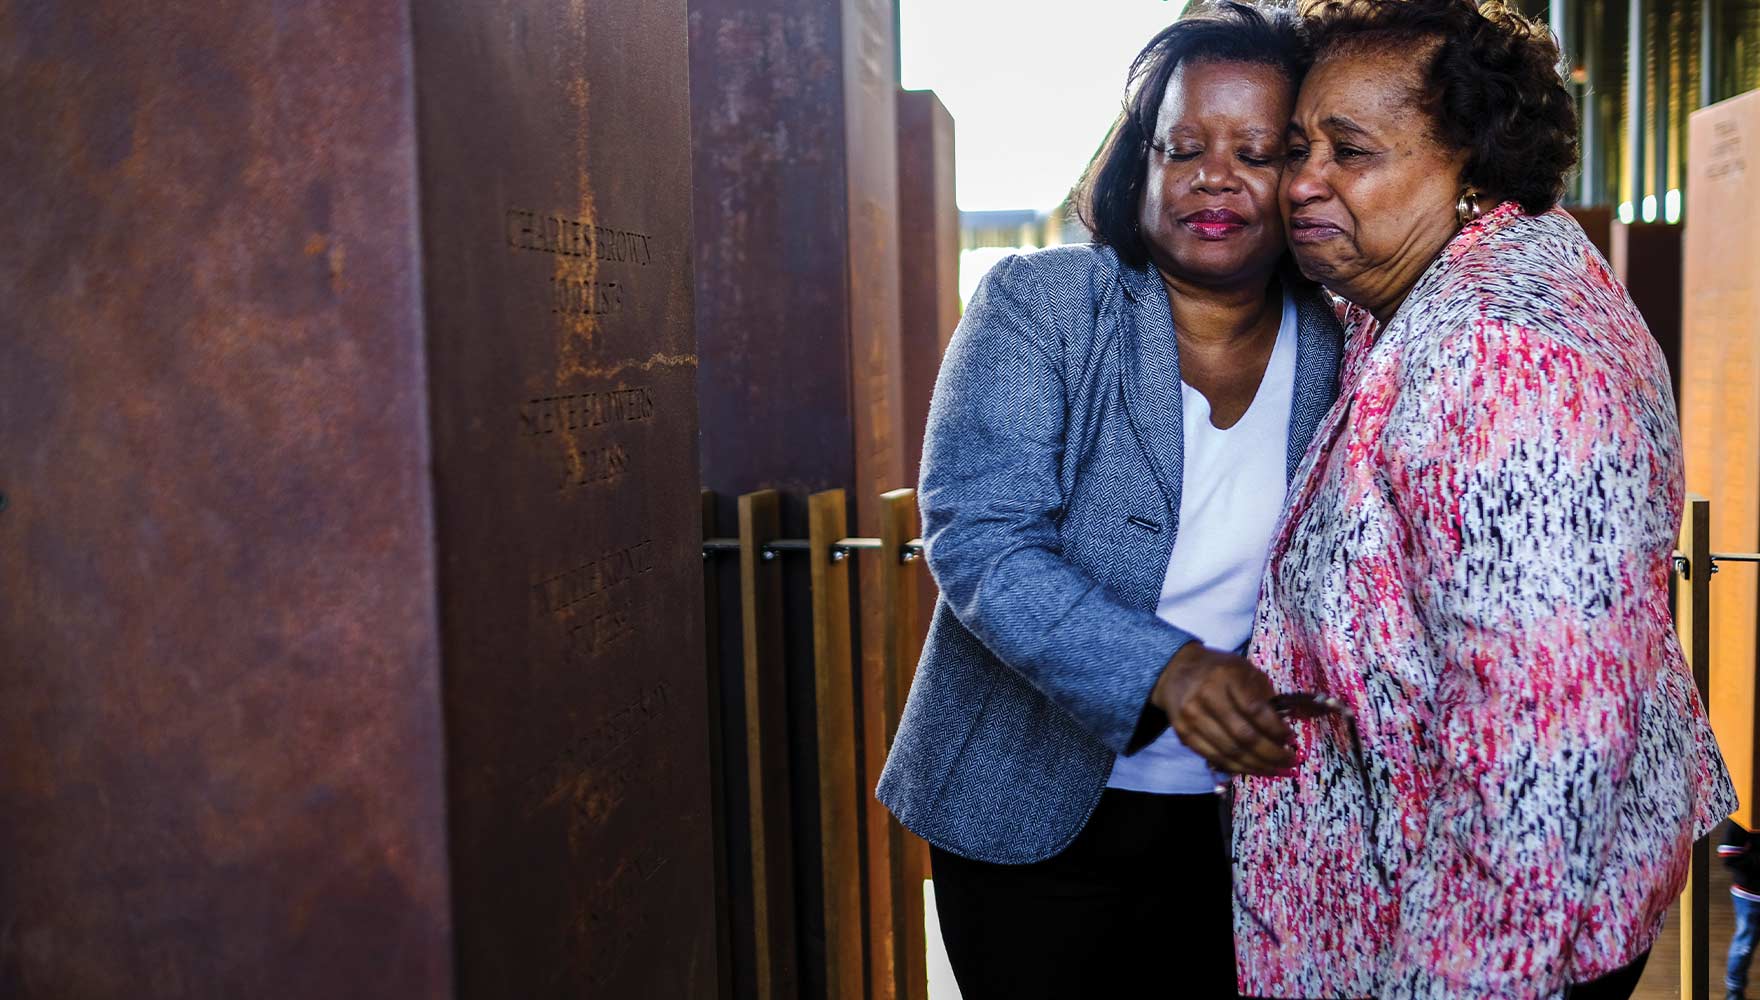 Two women embrace tearfully in front of a monument on which the name of their ancestor is inscribed at the National Memorial for Peace and Justice.